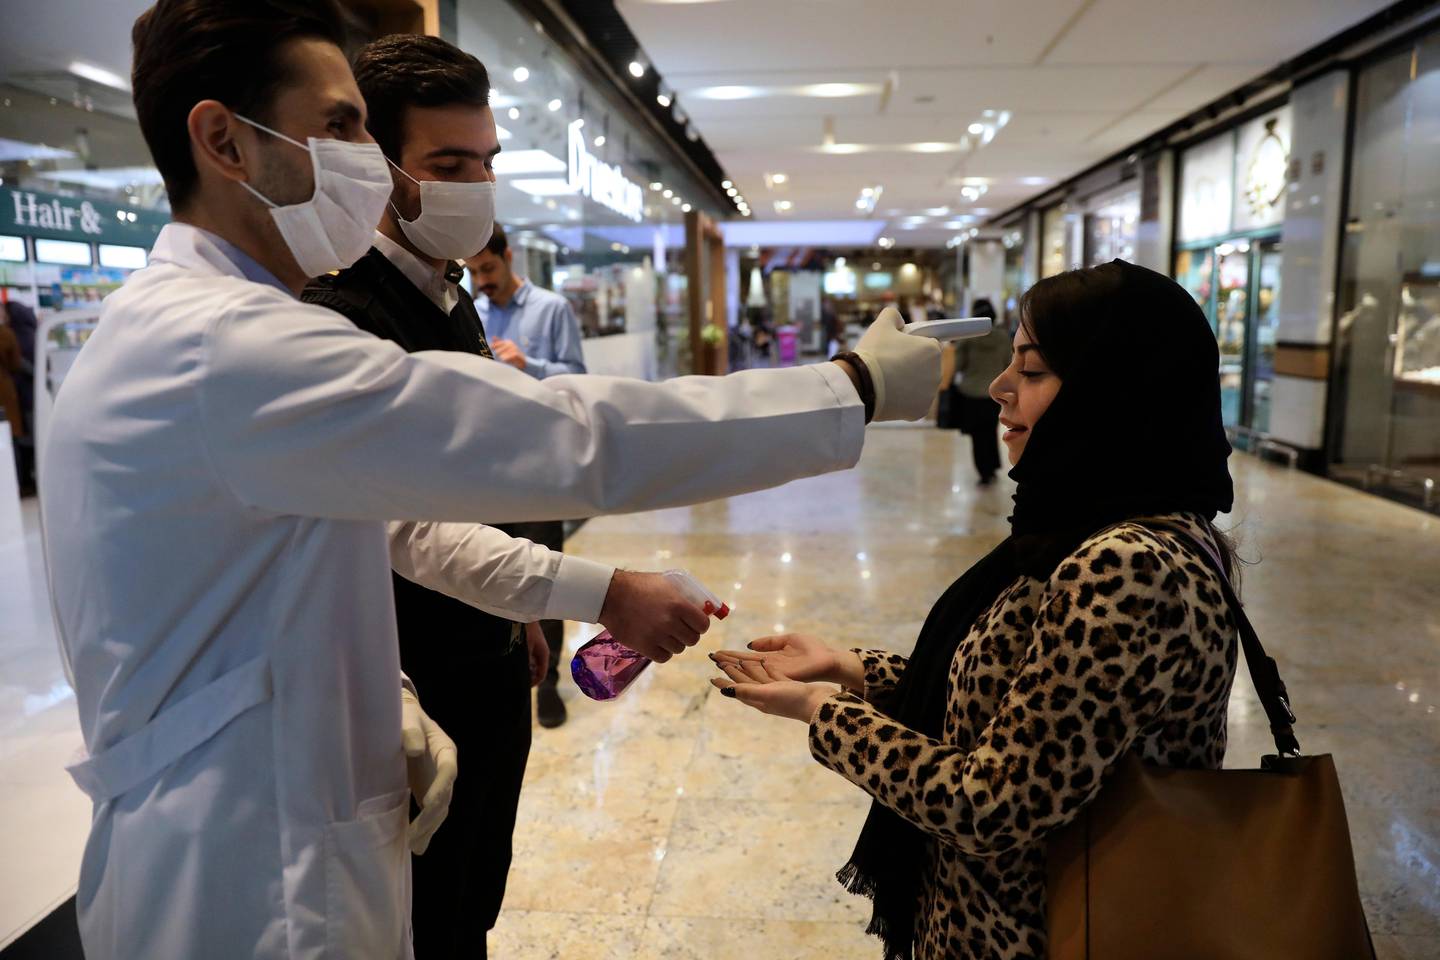 A woman has her temperature checked and her hands disinfected as she enters the Palladium Shopping Center, in northern Tehran, Iran, Tuesday, March 3, 2020. Iran's supreme leader put the Islamic Republic's armed forces on alert Tuesday to assist health officials in combating the outbreak of the new coronavirus, the deadliest outside of China. (AP Photo/Vahid Salemi)